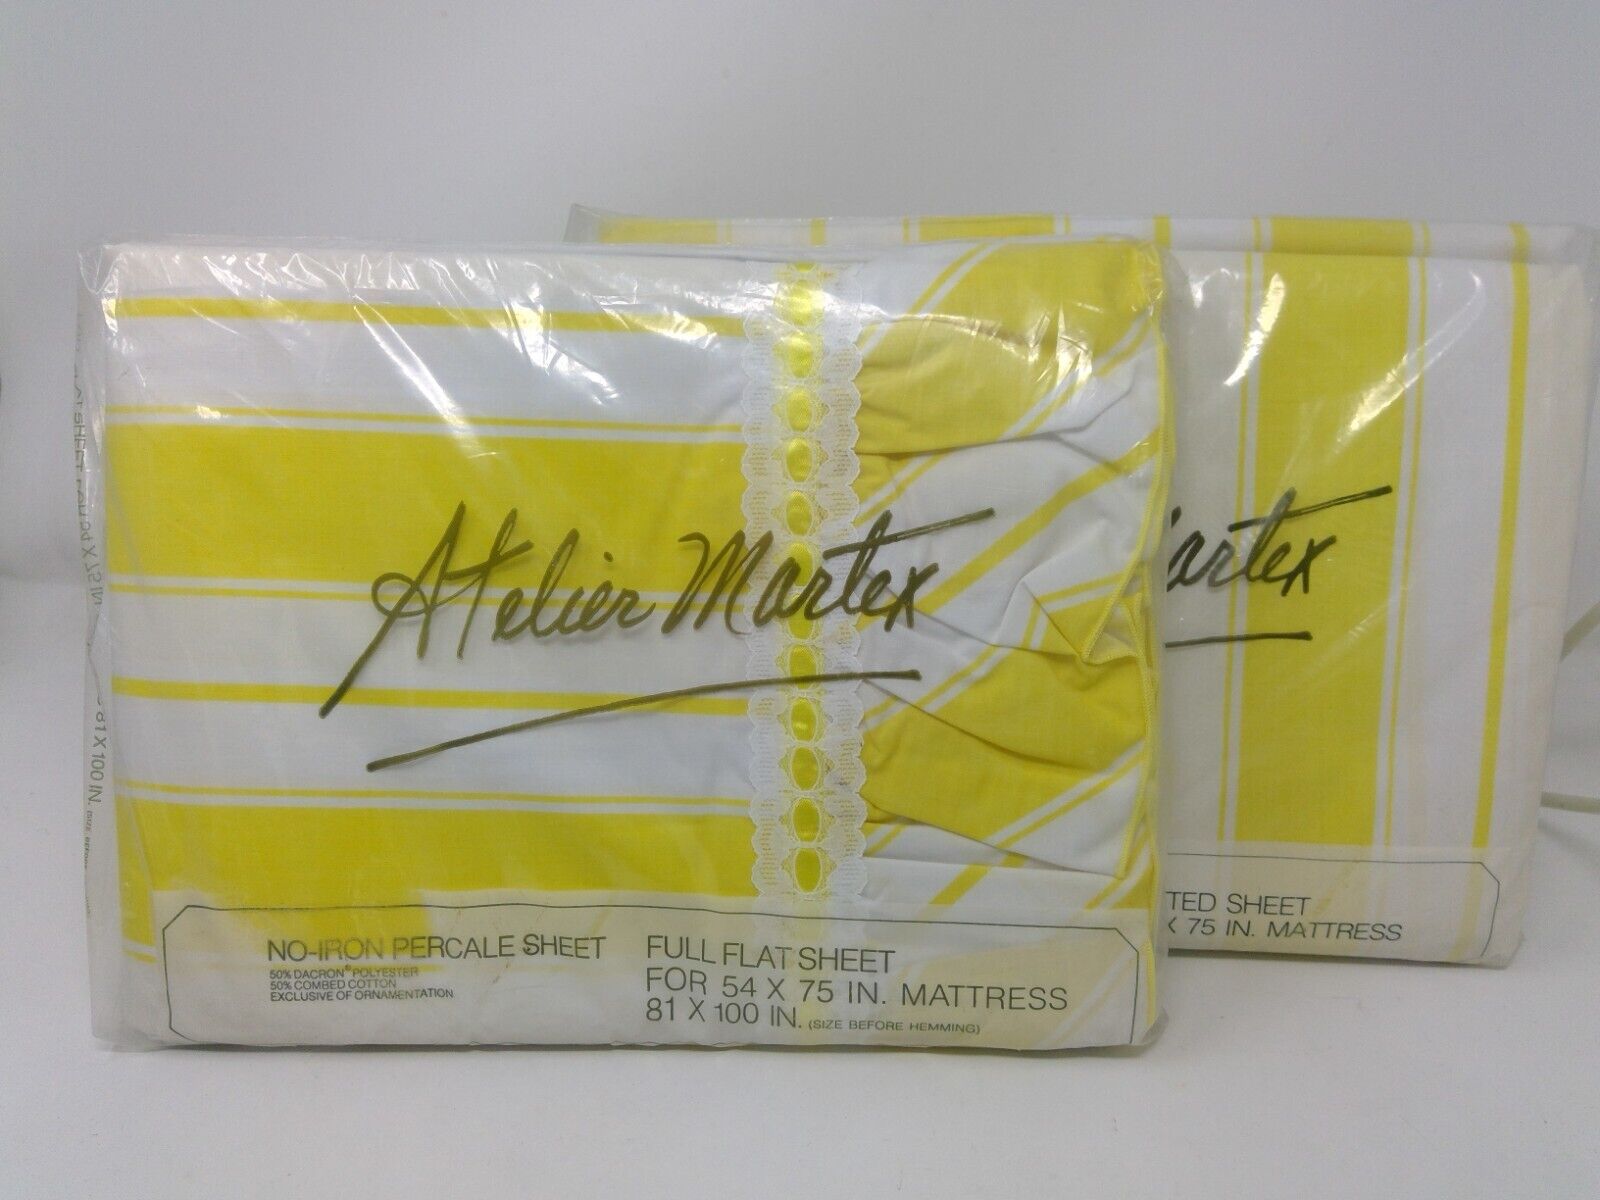 Vintage Yellow & White Striped Atelier Martex Percale Full Flat & Fitted Sheets